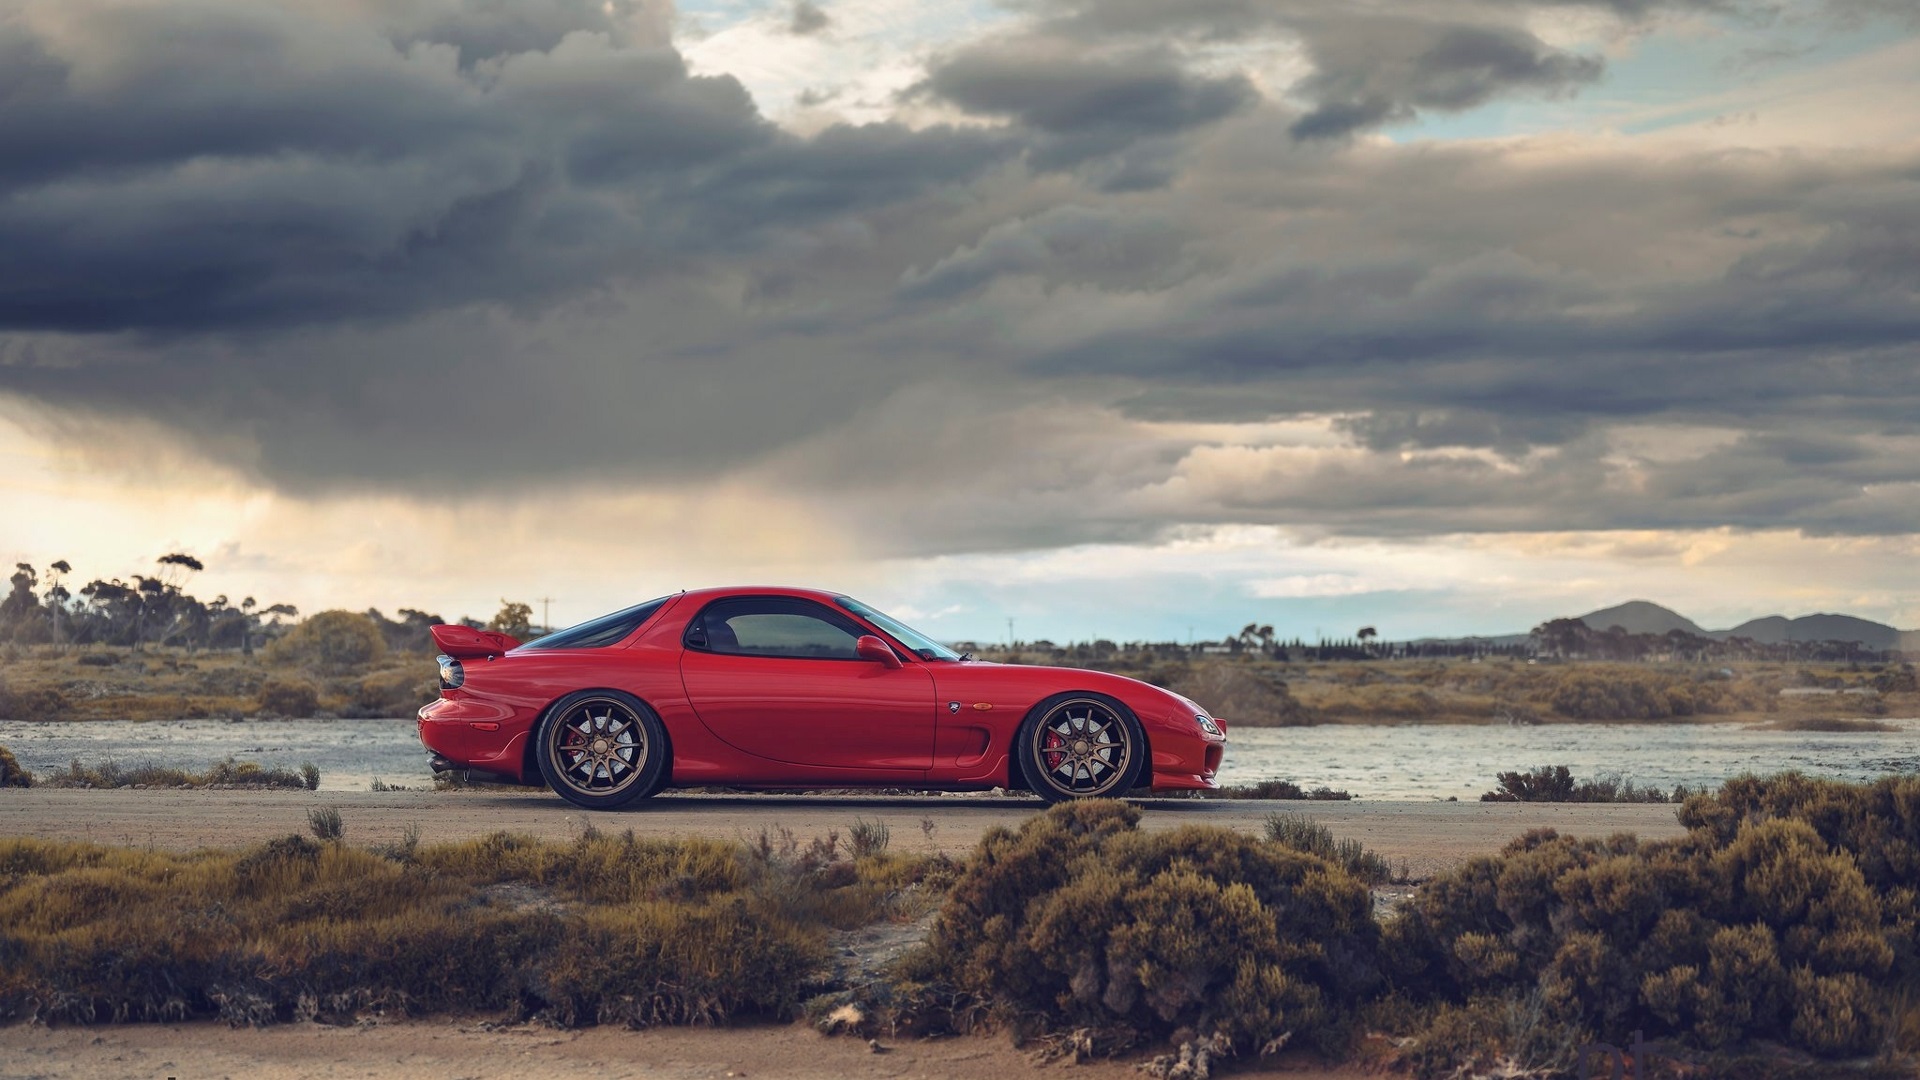 General 1920x1080 Mazda RX-7 Mazda Japanese cars red cars clouds sky car vehicle sports car water side view outdoors PT works